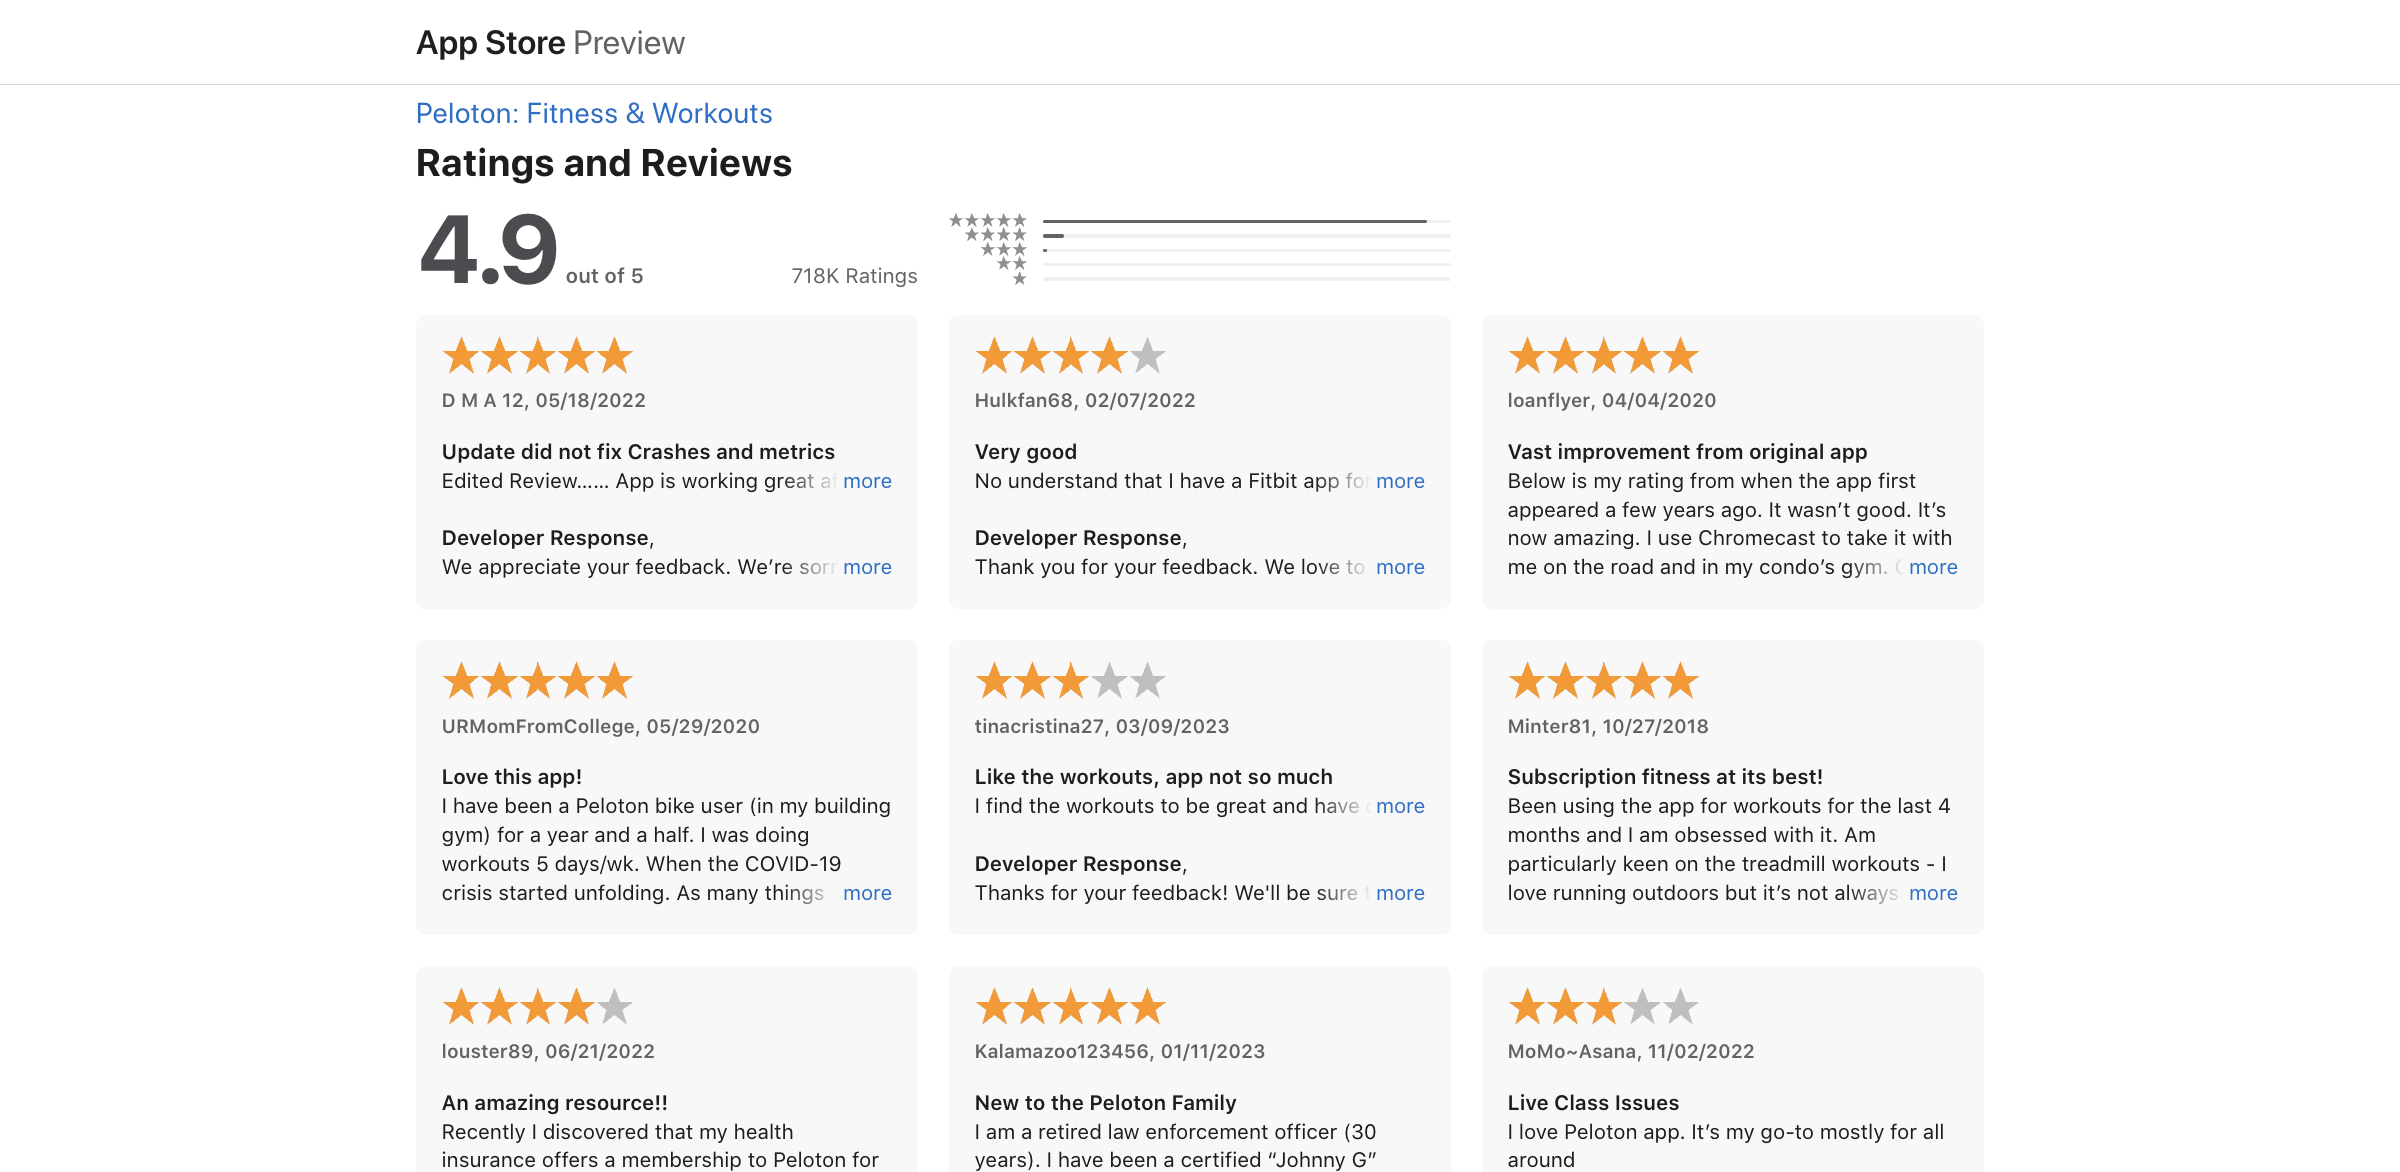 Let's use our easy 2-click integration to analyze Peloton's App Store reviews.